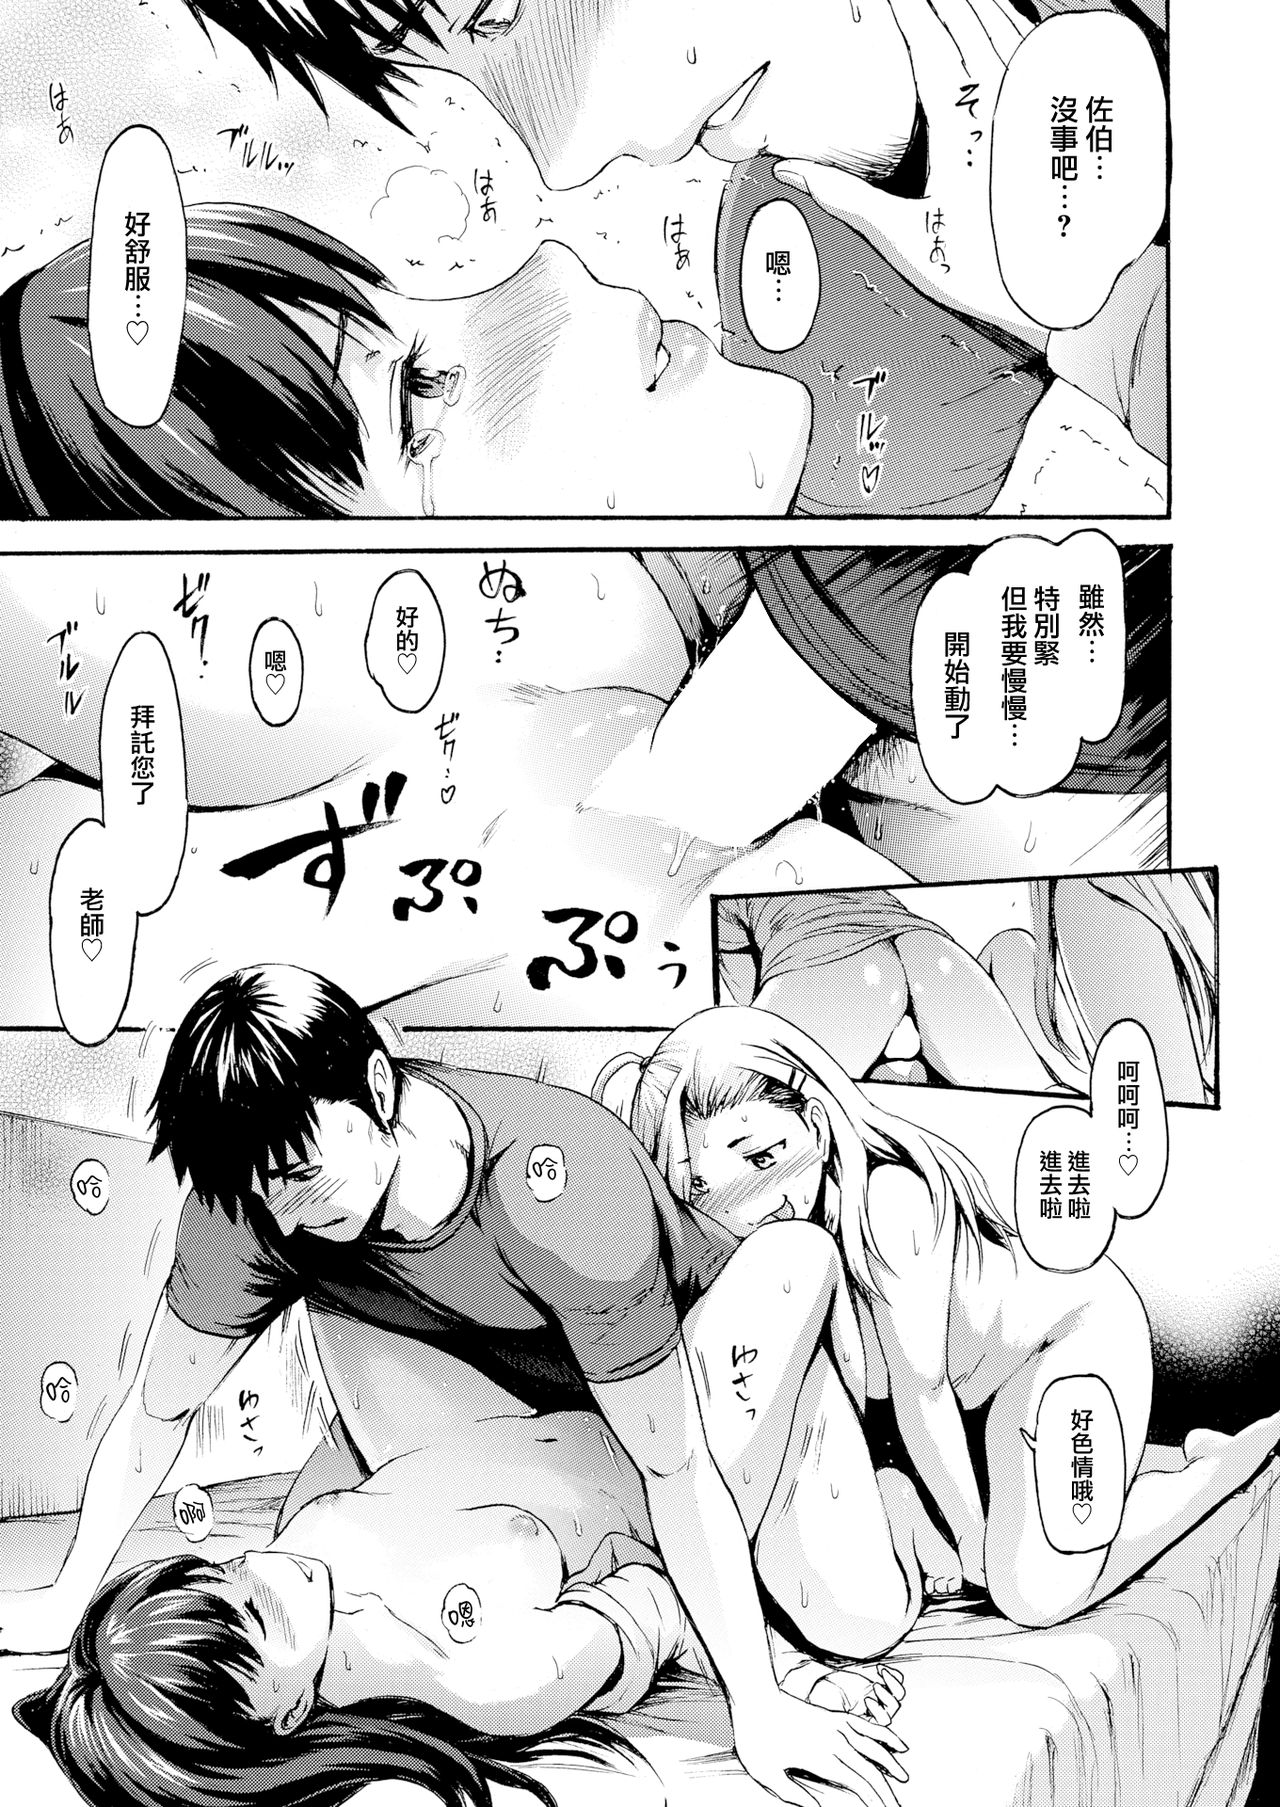 [E-Musu Aki] Dokkiri Mate - Do You Wanna SEX With Younger Pussy? (COMIC-X-EROS #61) [Chinese] [無邪気漢化組] [Digital] page 23 full